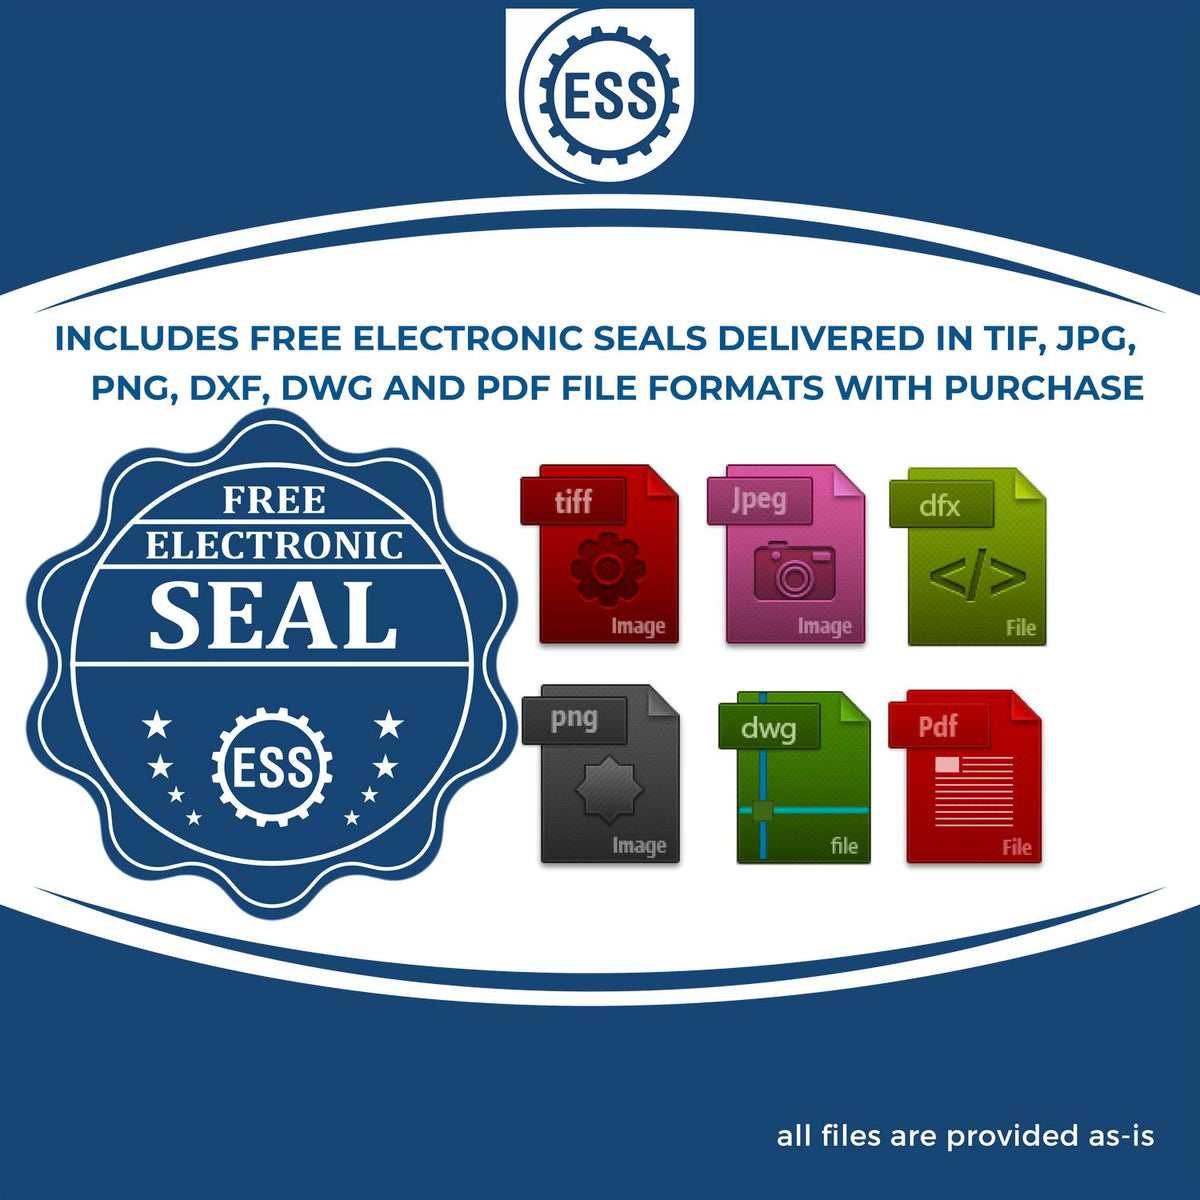 An infographic for the free electronic seal for the New Mexico Desk Architect Embossing Seal illustrating the different file type icons such as DXF, DWG, TIF, JPG and PNG.